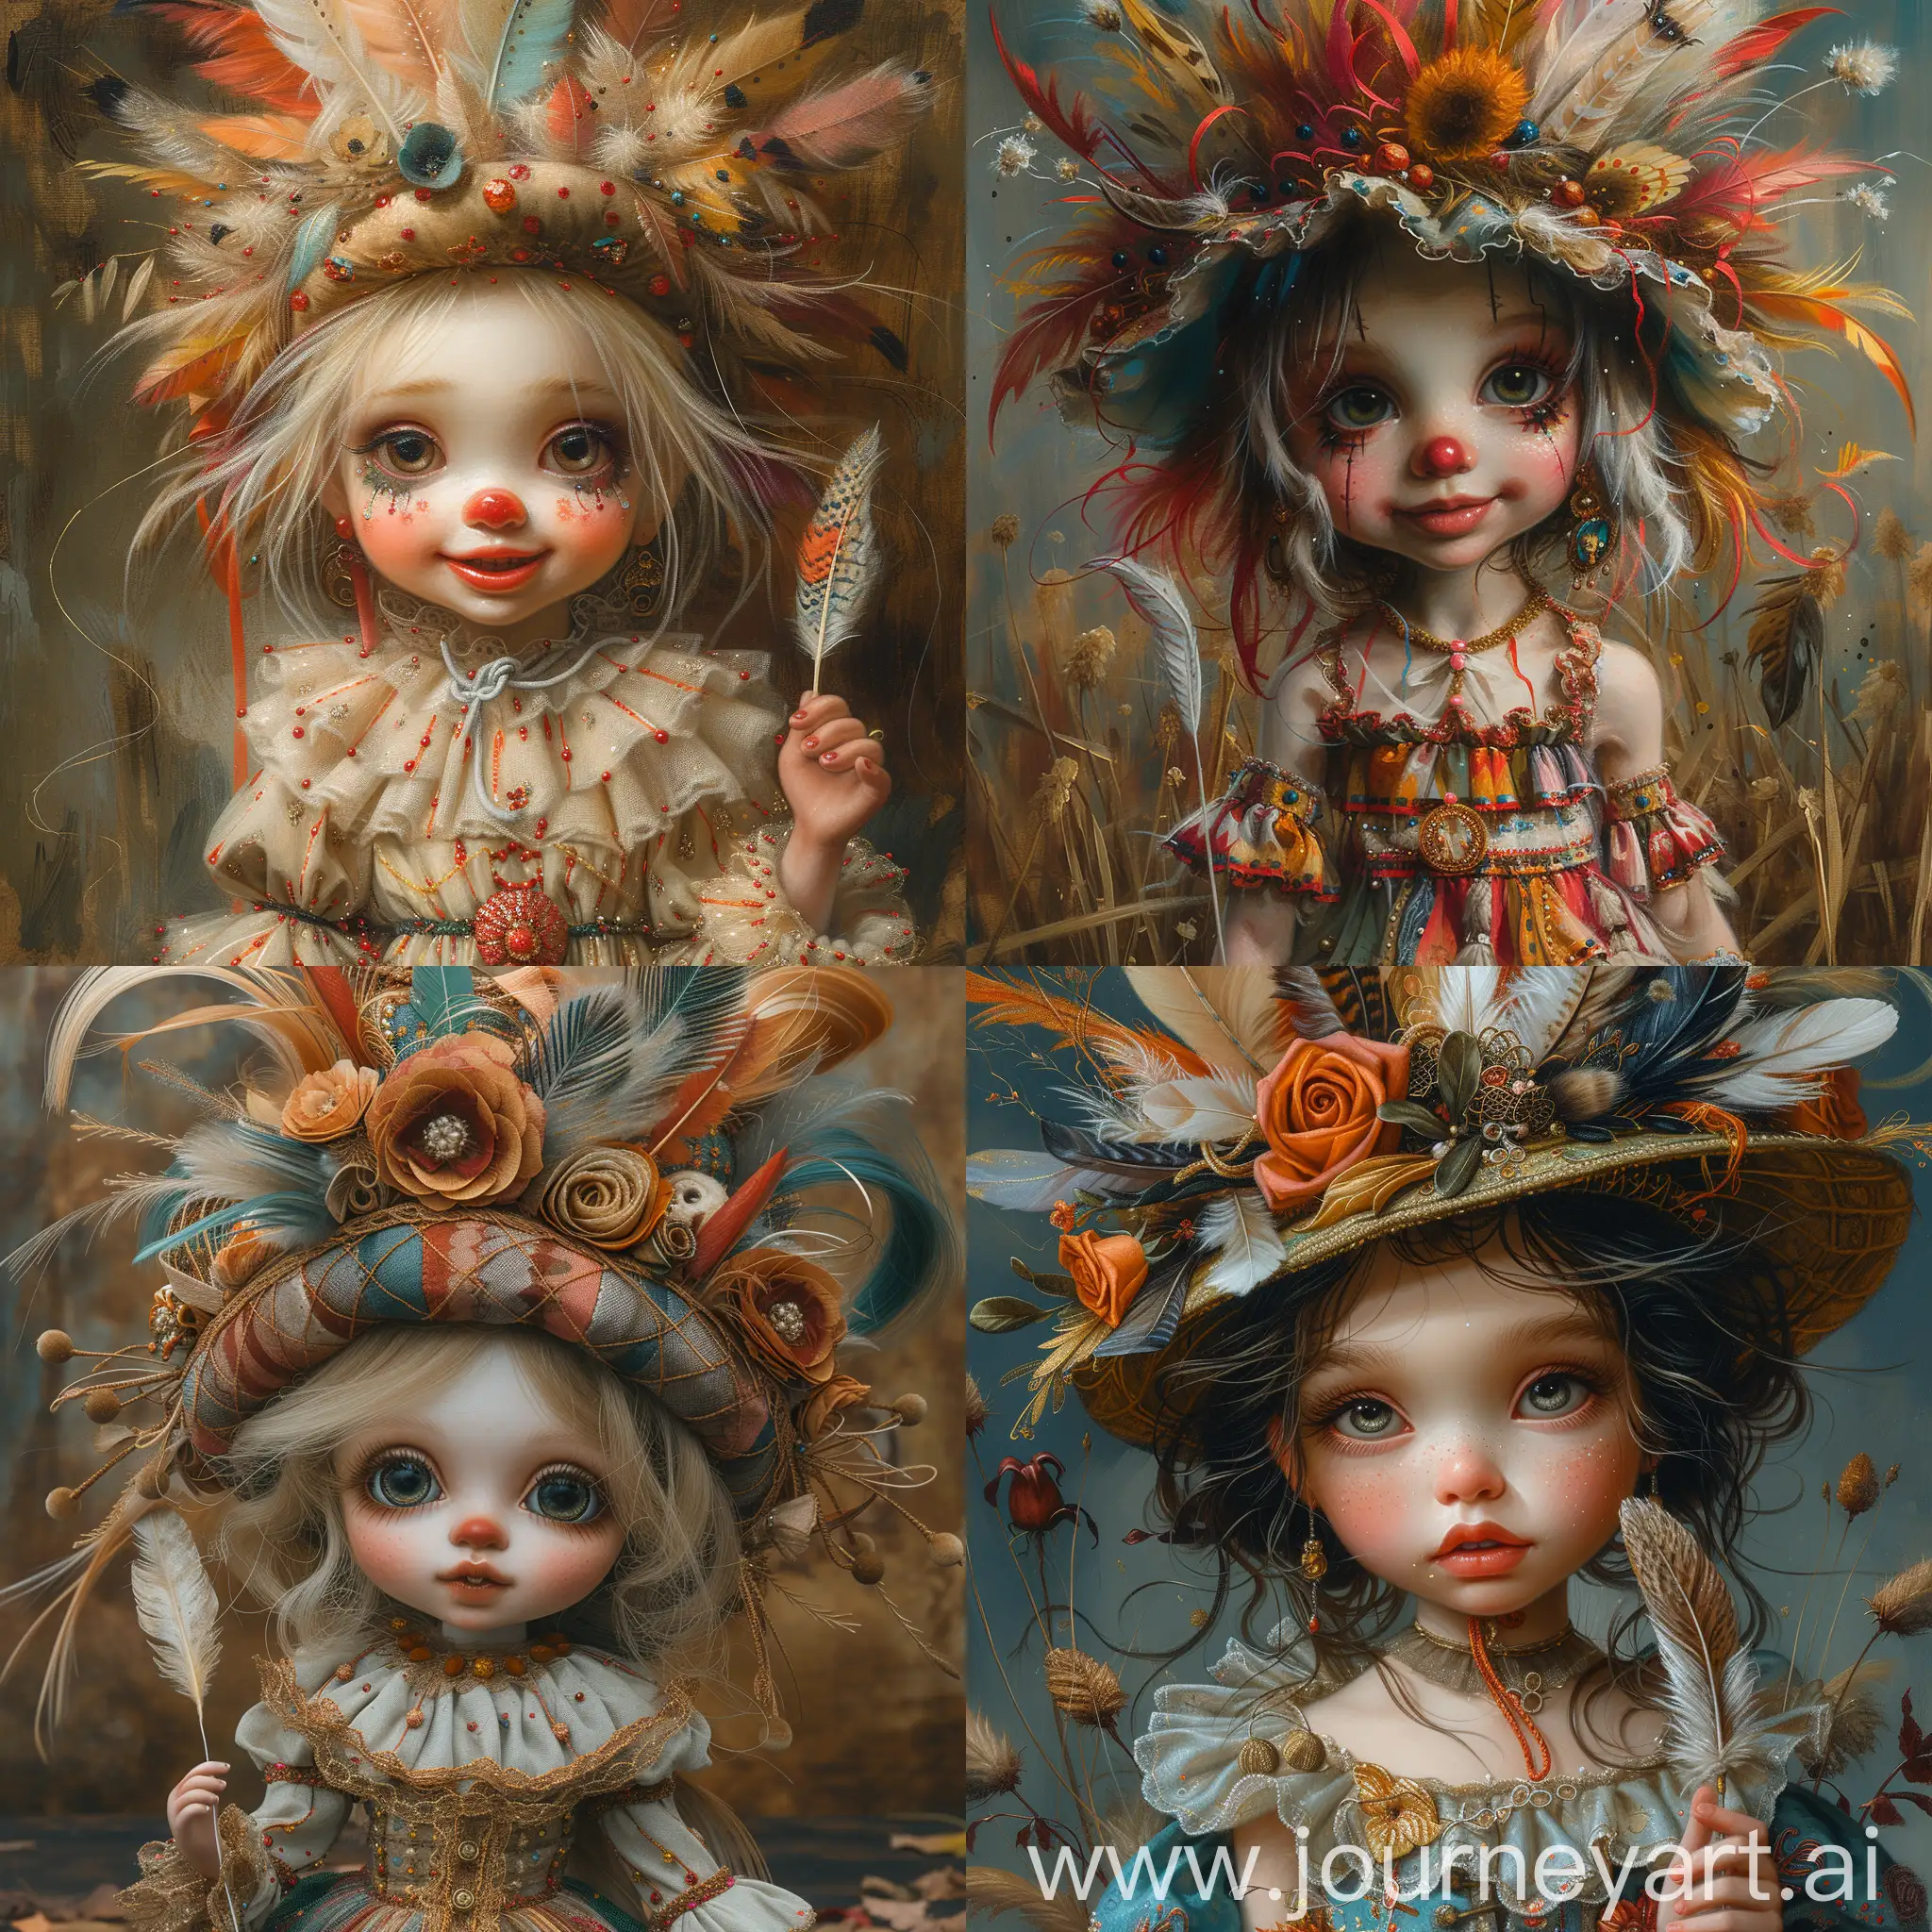 Surreal-China-Clown-Doll-with-Feather-Hat-in-Vibrant-Oil-Painting